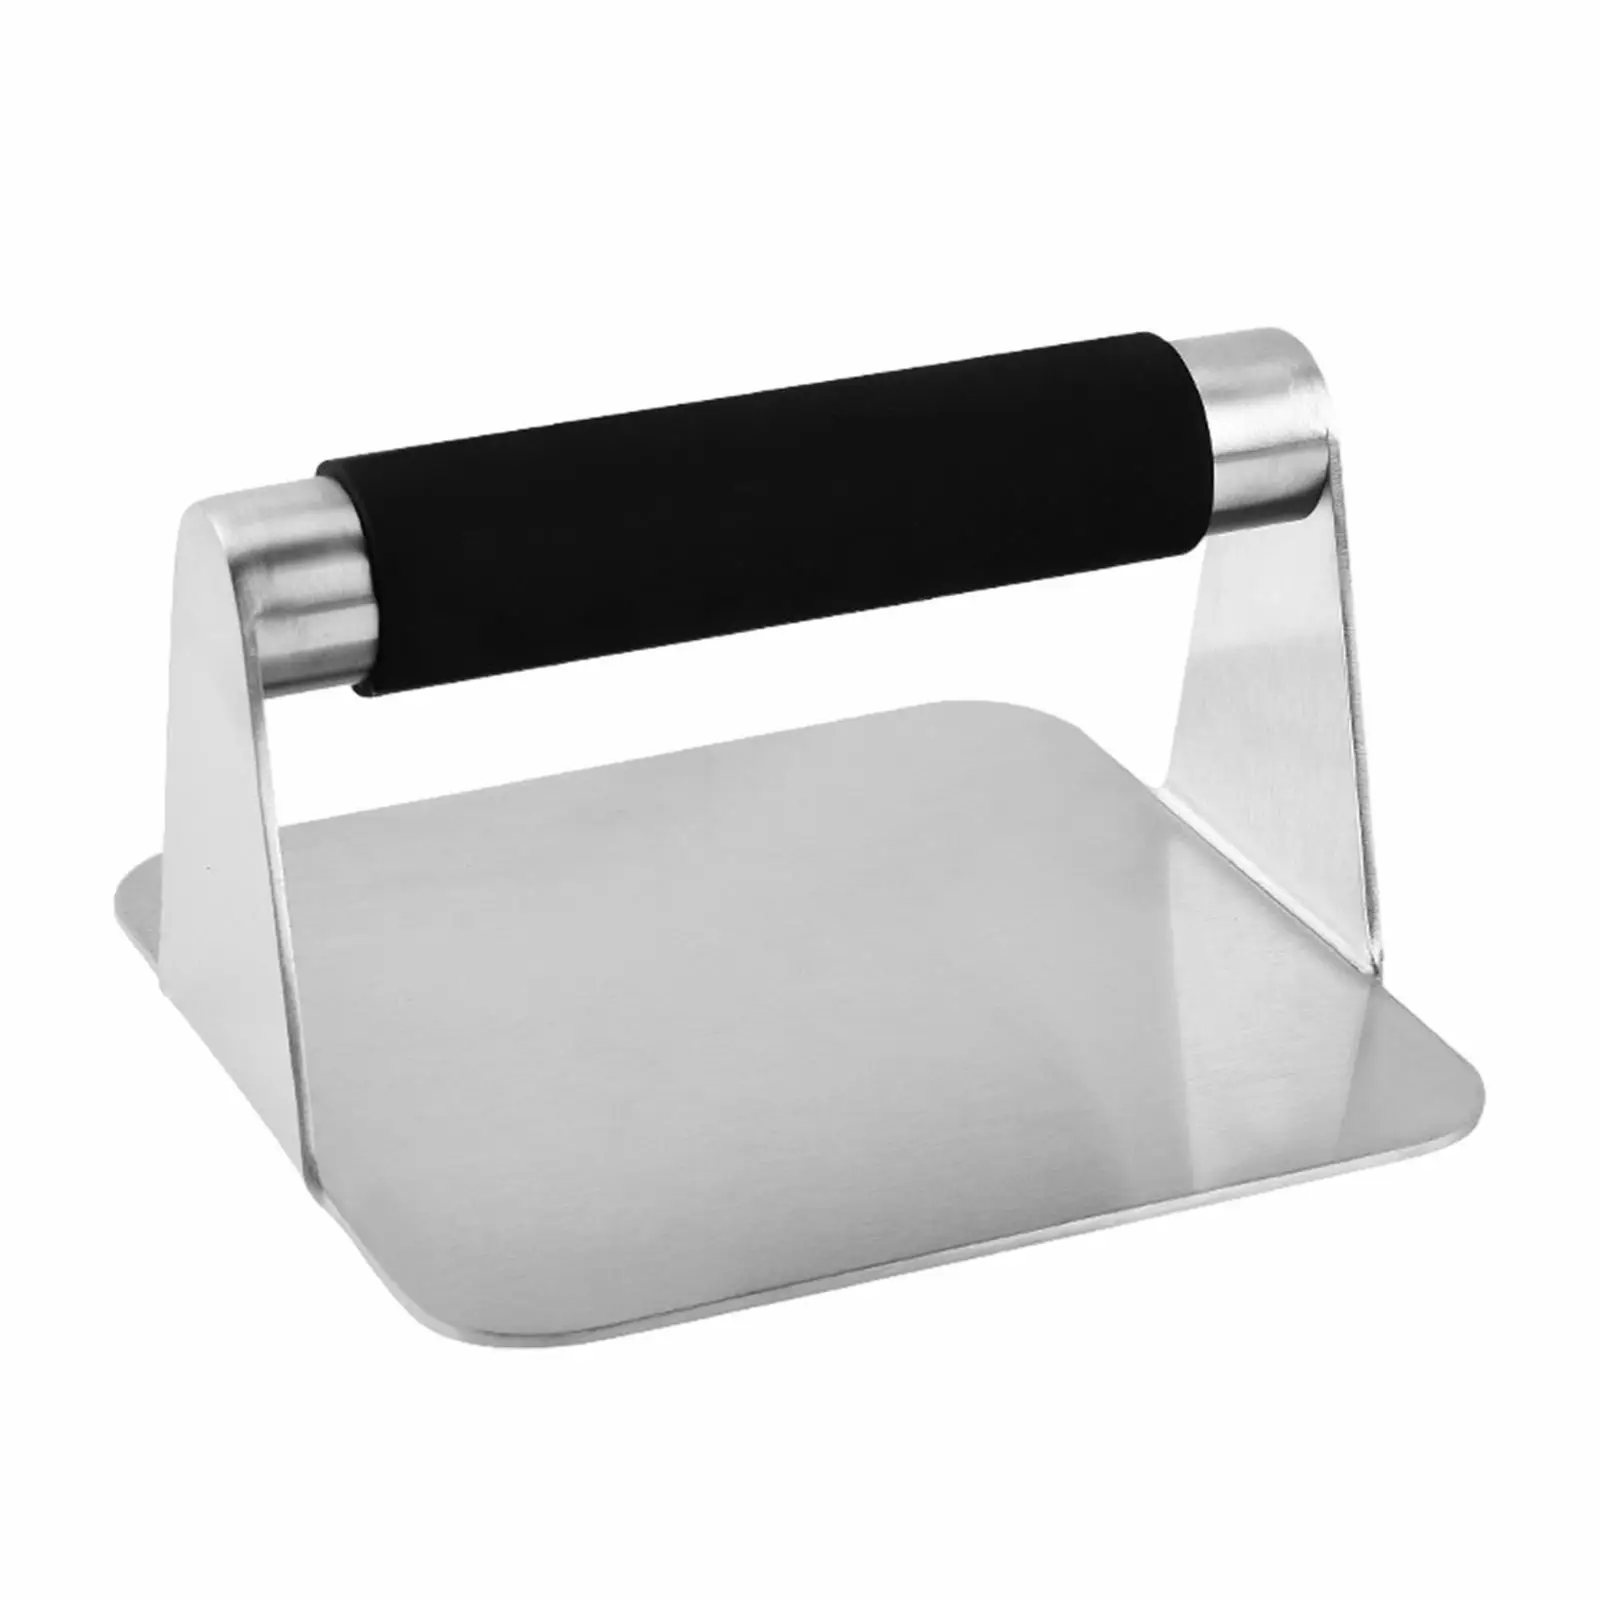 Stainless Steel Burger Press Stainless Steel Griddle Accessories Meat Smasher Grill Press for Steaks BBQ Sandwich Meat Cooking